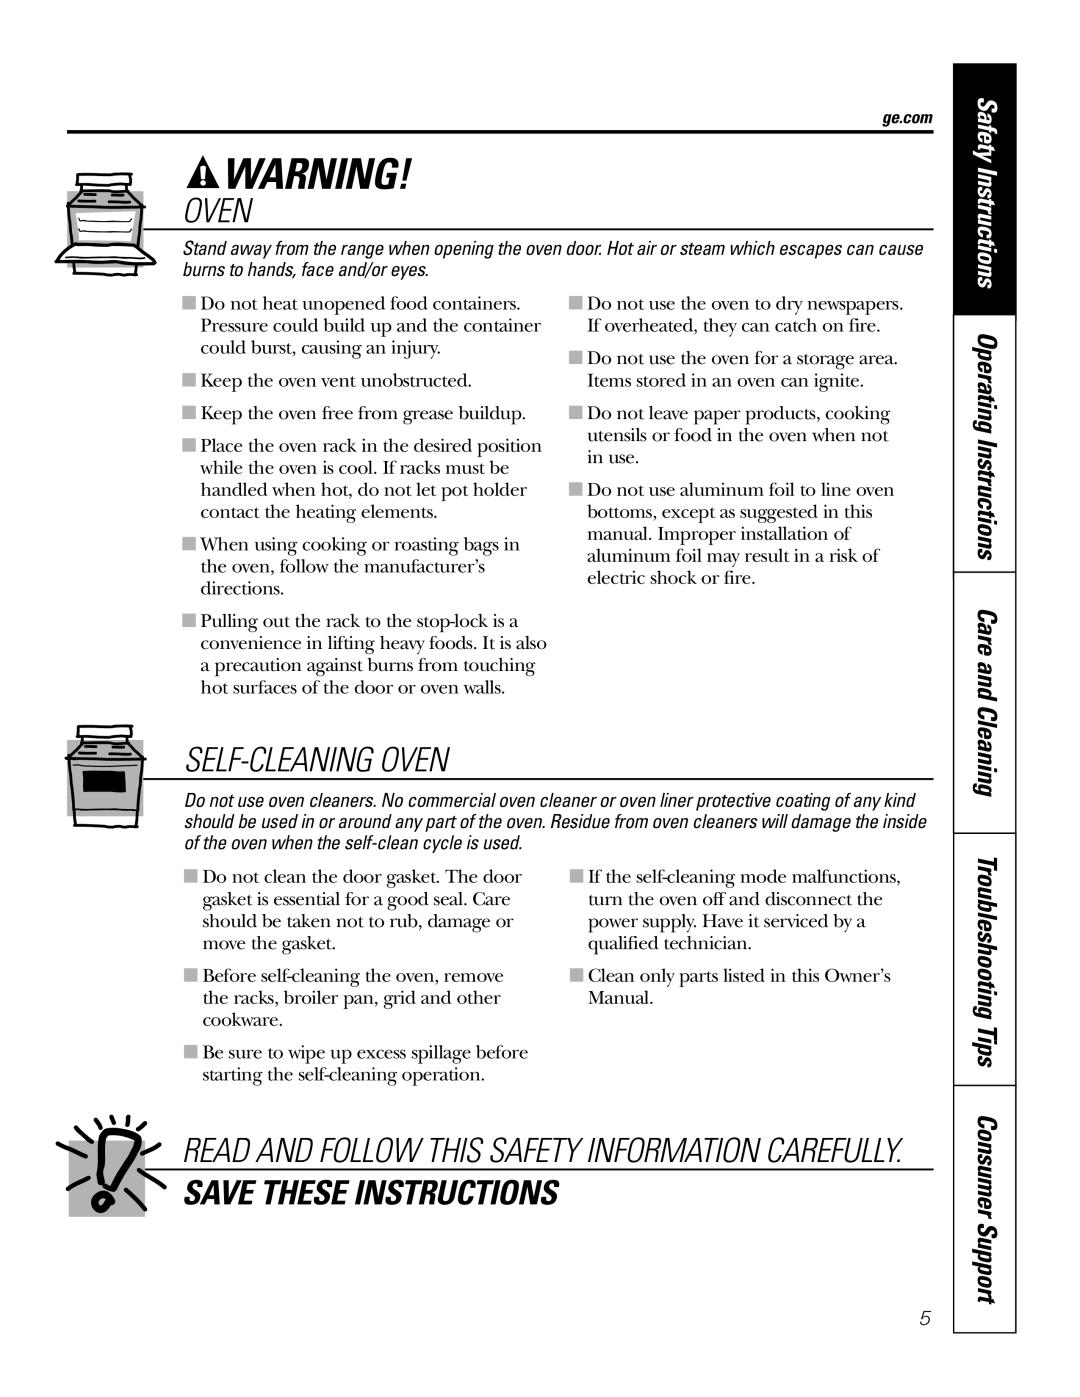 GE JD900, JS900 Self-Cleaning Oven, Save These Instructions, Operating Instructions Care and, Troubleshooting Tips 